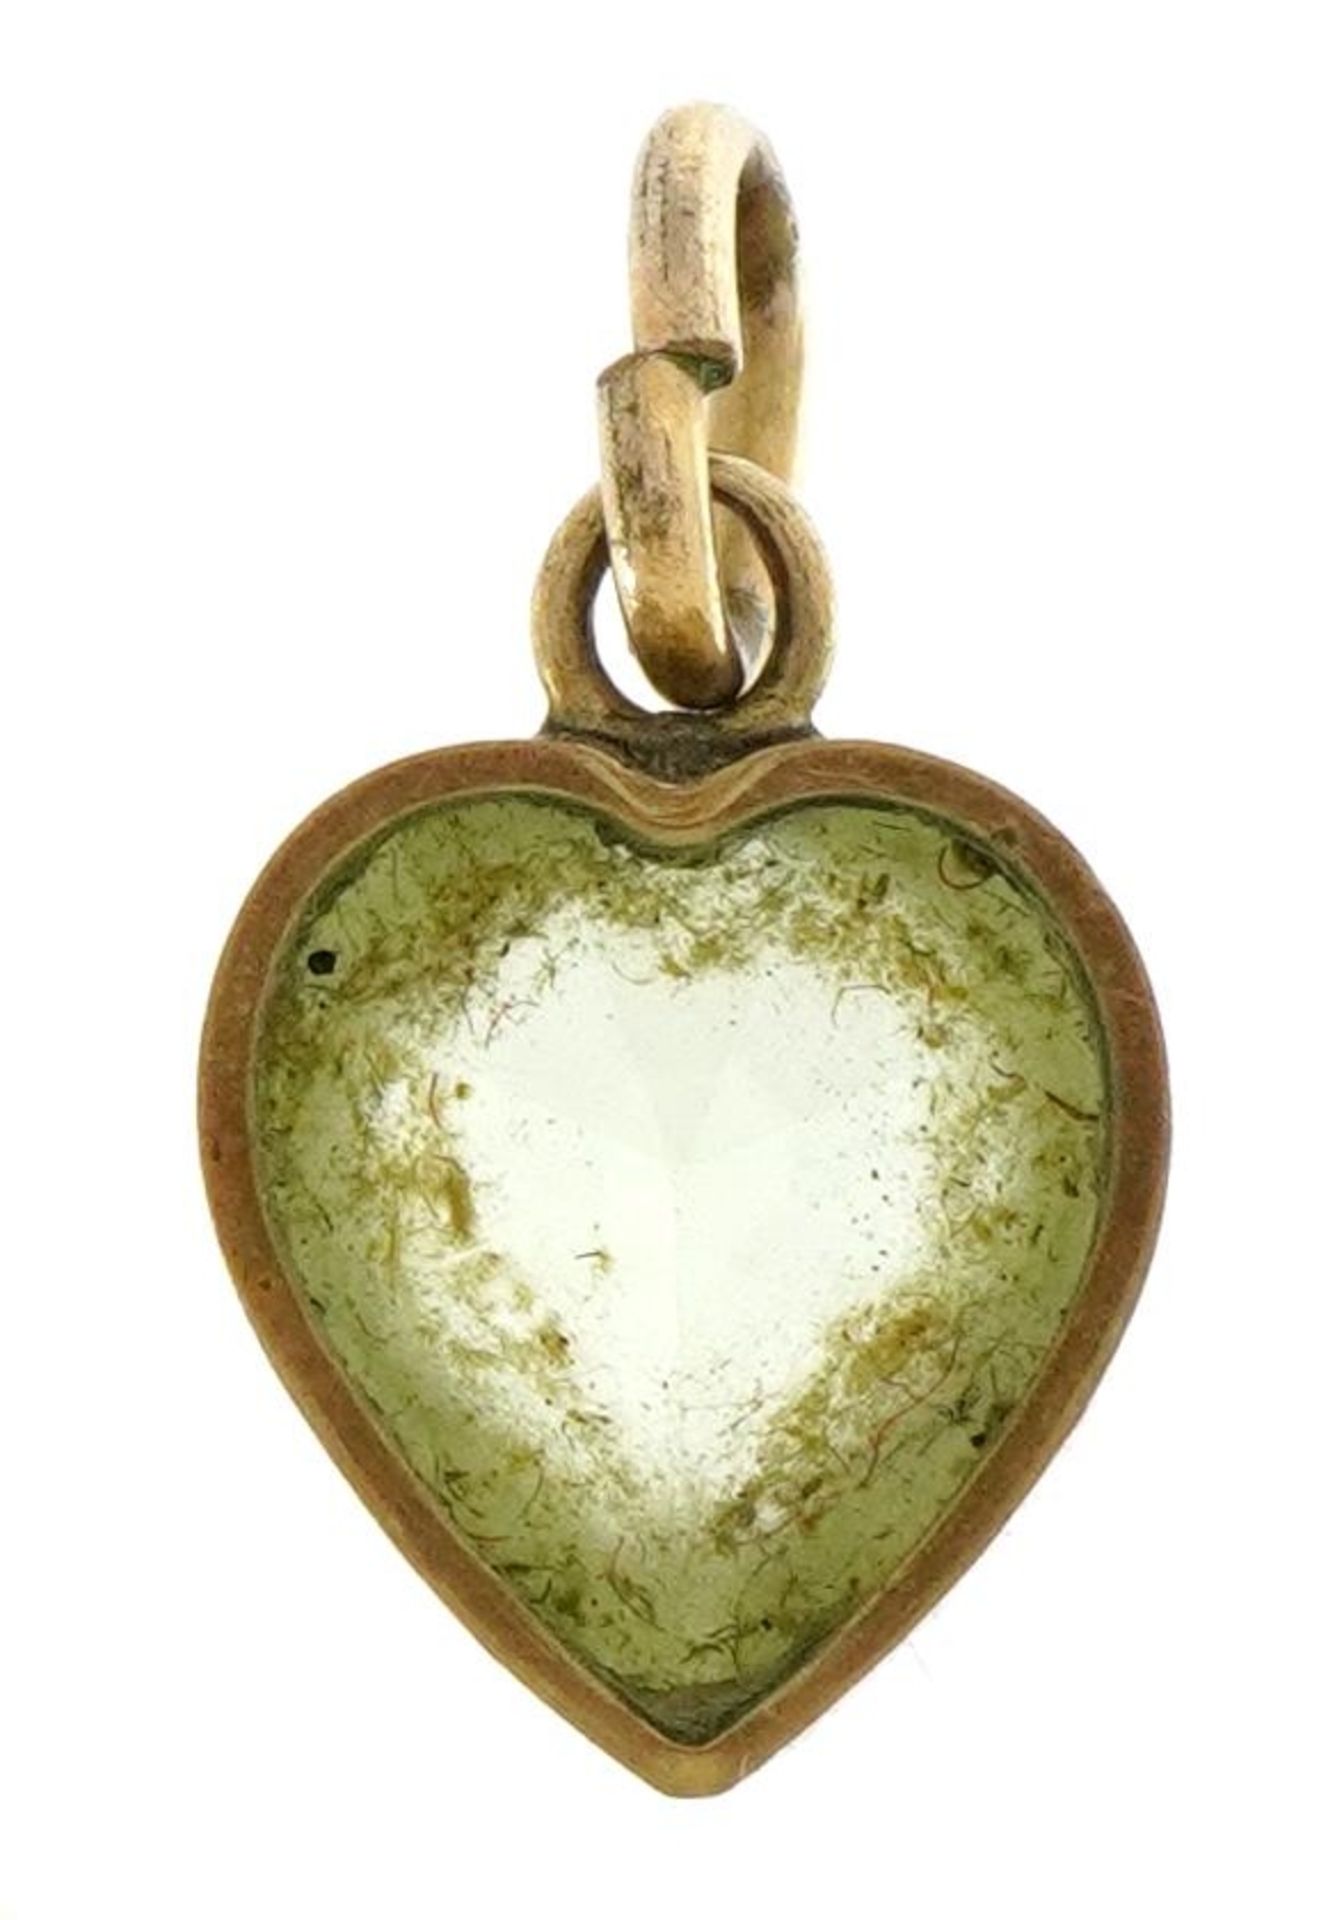 Unmarked gold green stone, possibly peridot, love heart pendant, 1.6cm high, 0.9g - Image 2 of 2